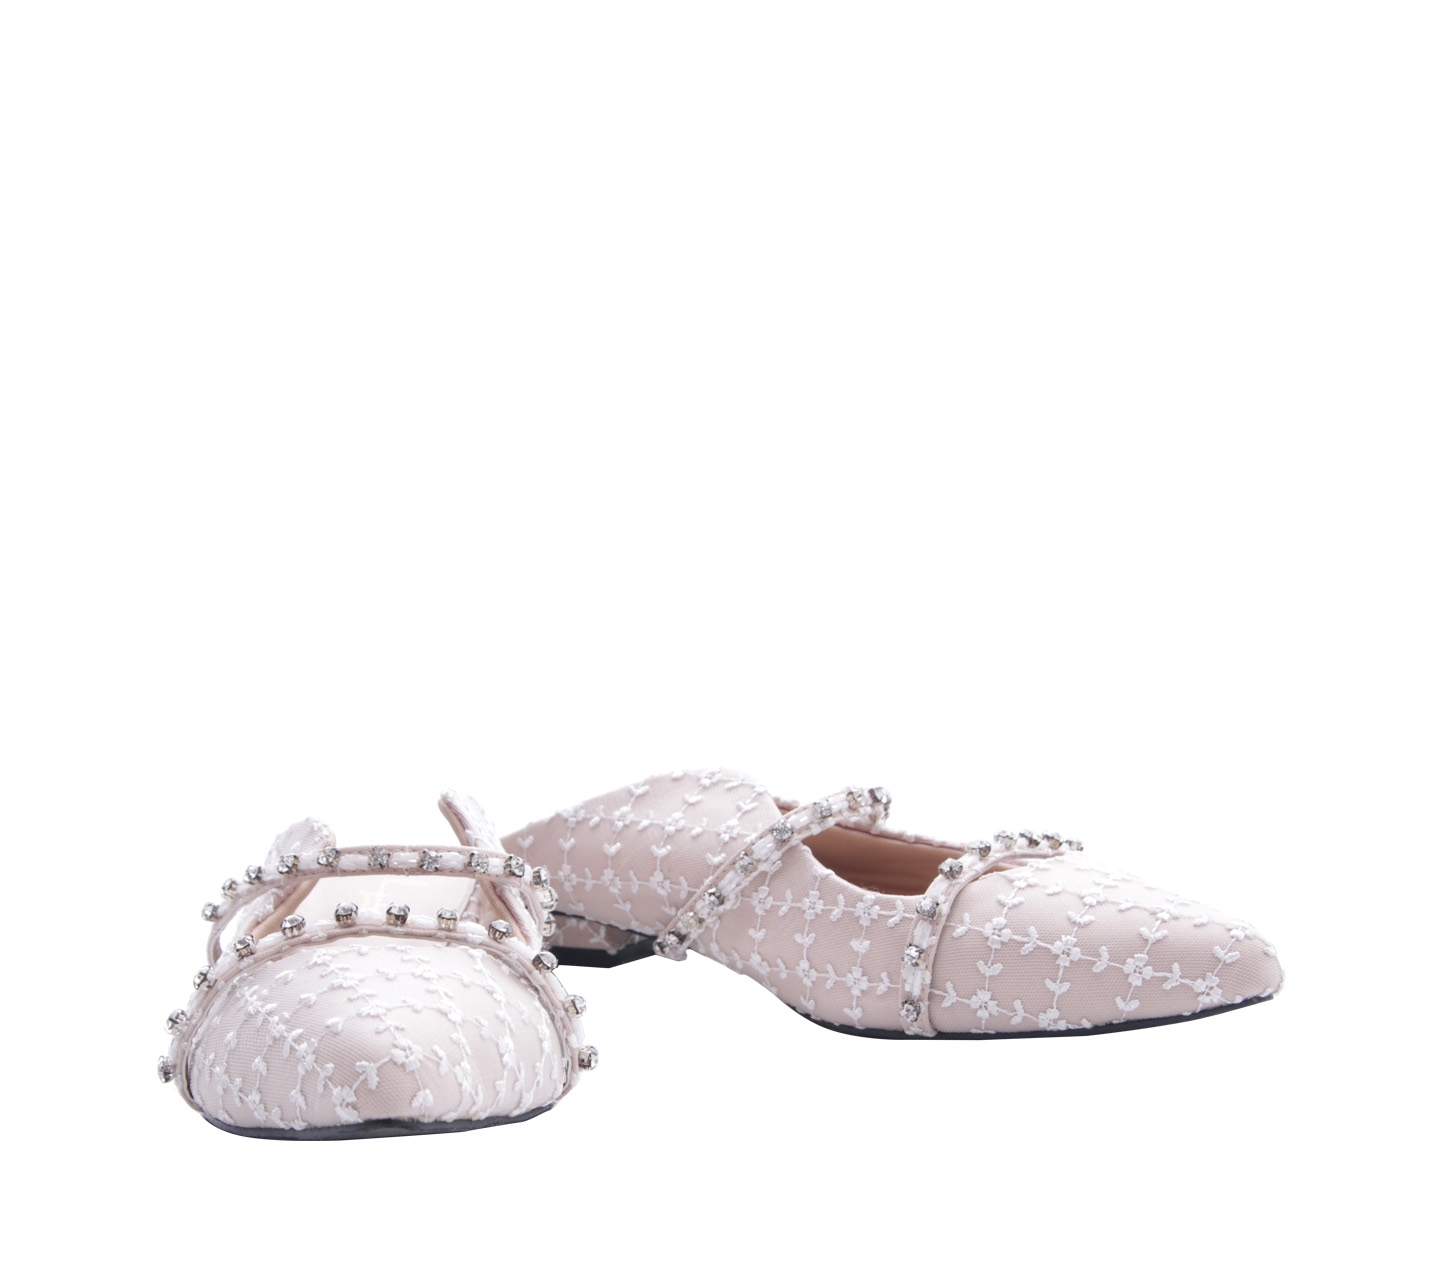 Langka by Lina Lee Nude Mules Beaded Sandals